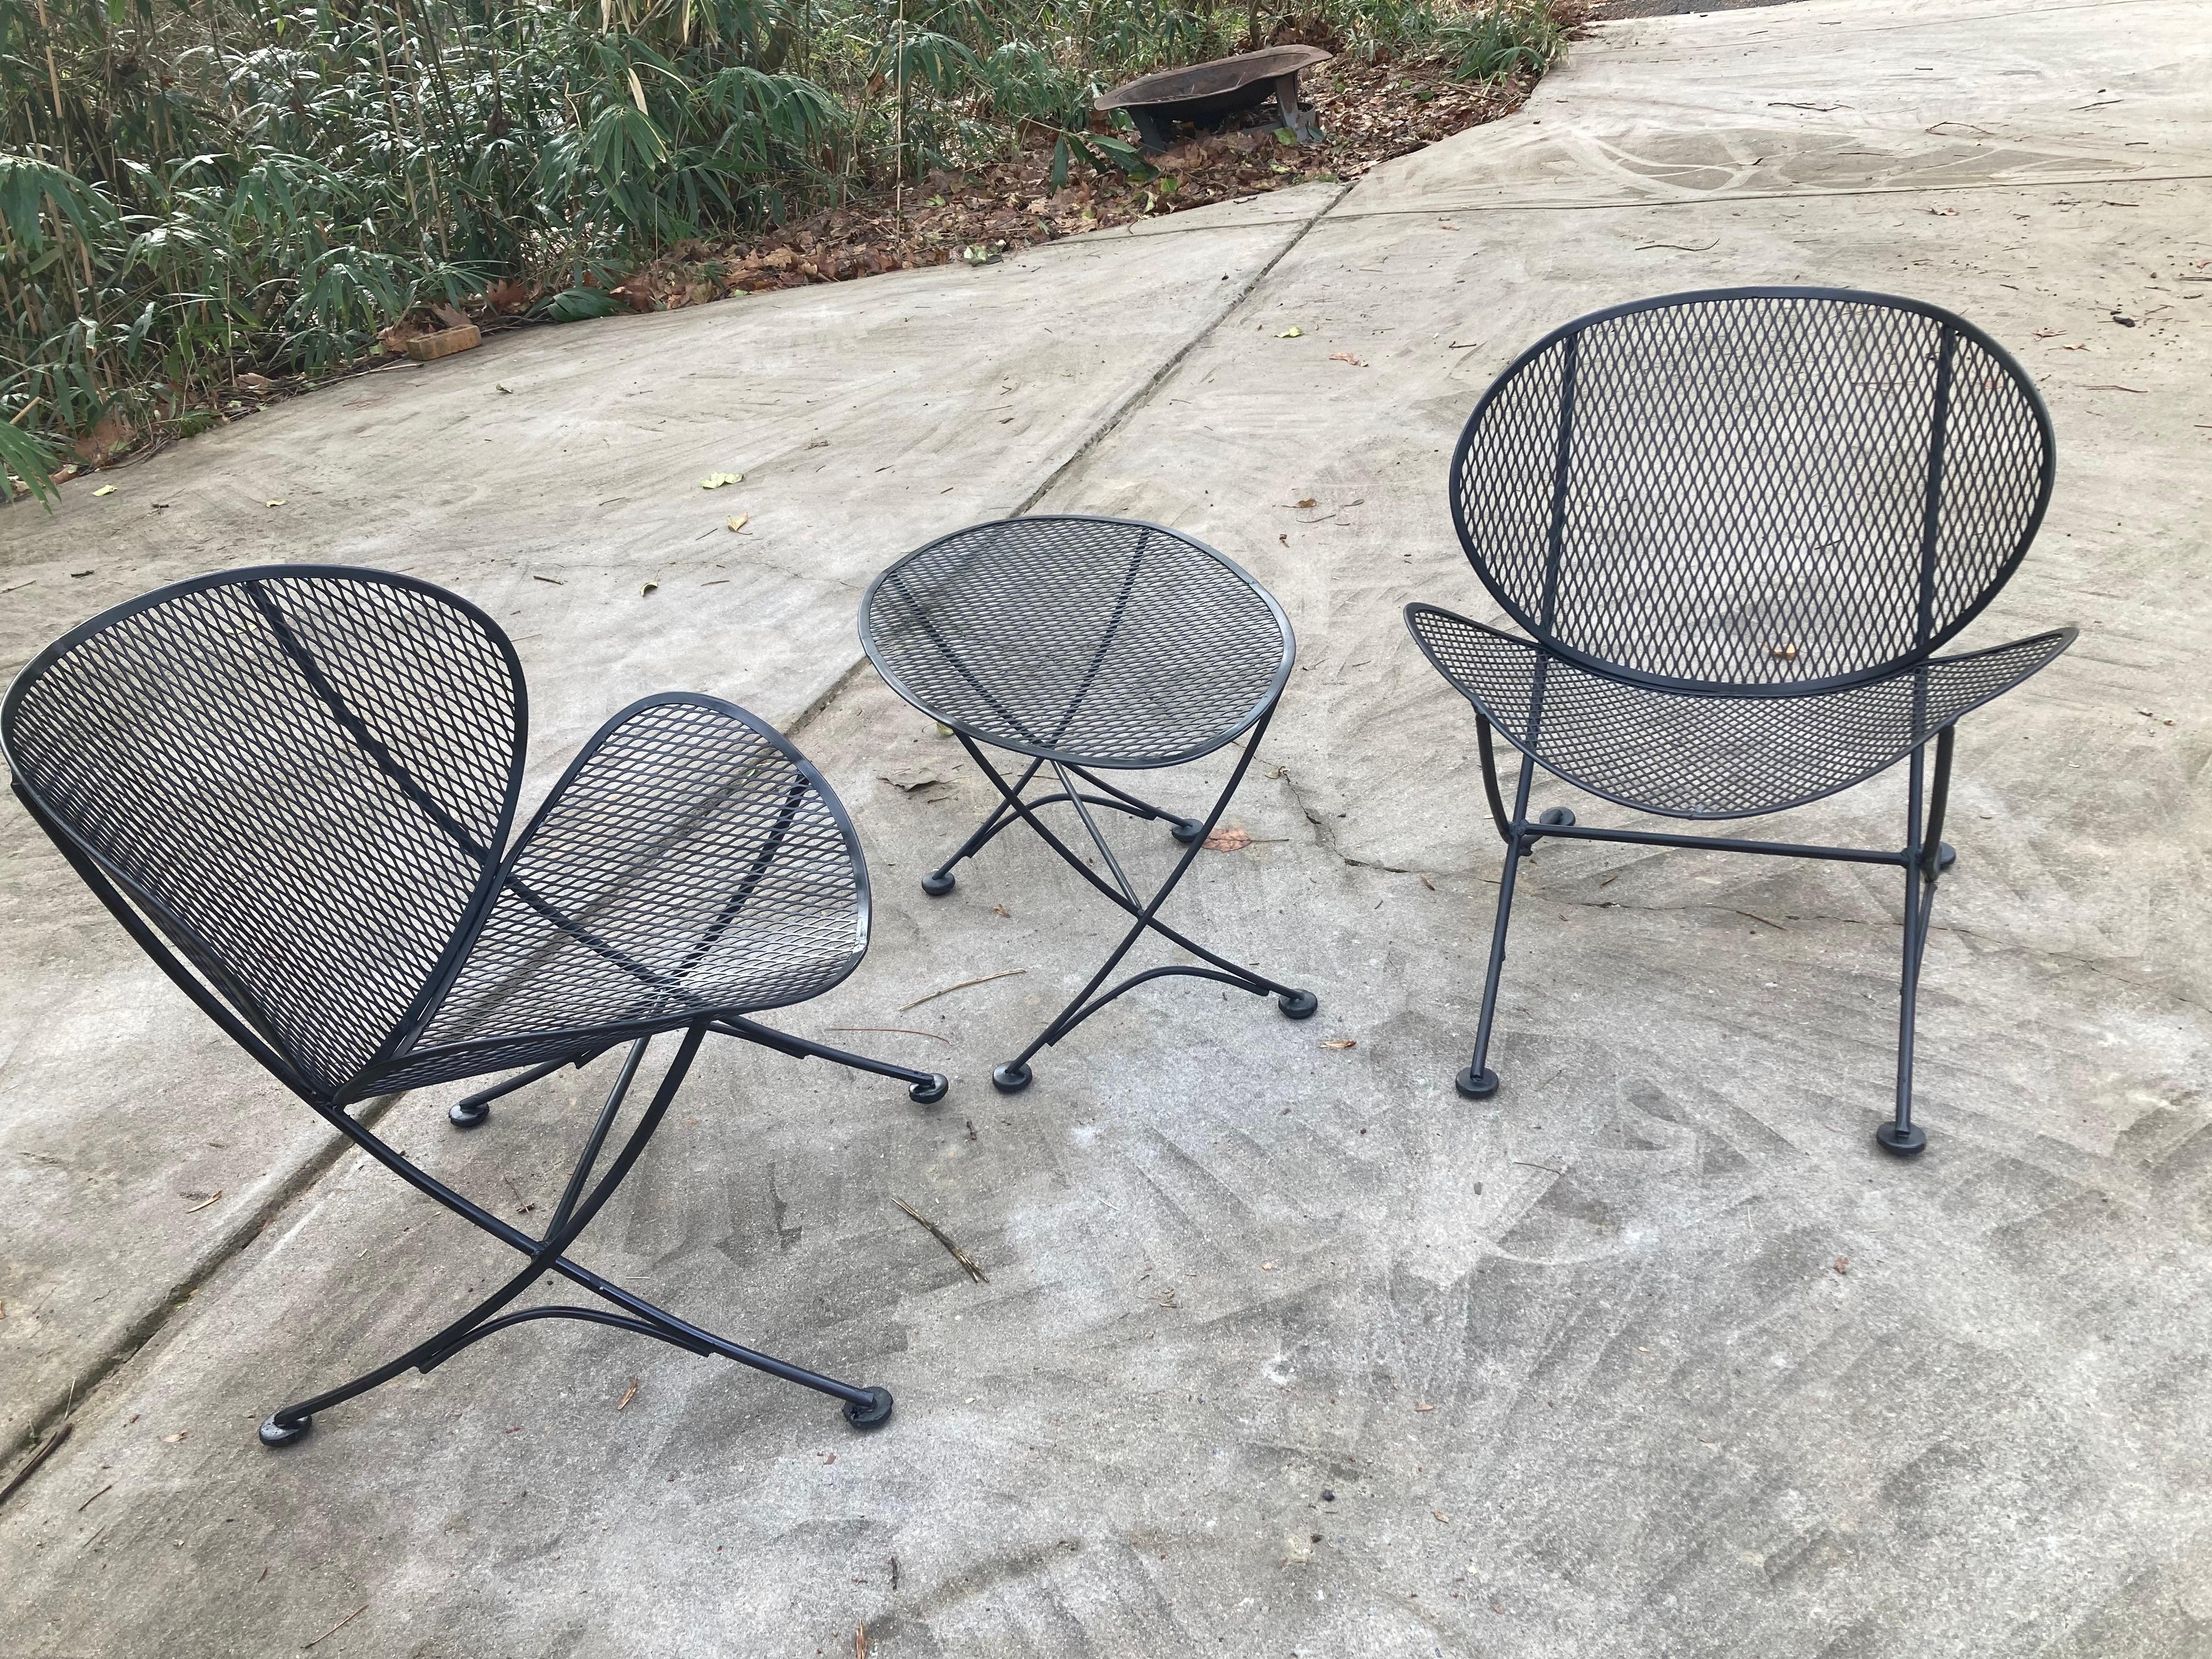 Chic set of 3 vintage Salterini pieces, to include 2 lounge chairs and a small coffee table. Designed by Maurizio Tempestini, known as the Orange Slice pattern, circa 1950/1960's. The set is in very good condition, structurally sound and sturdy,